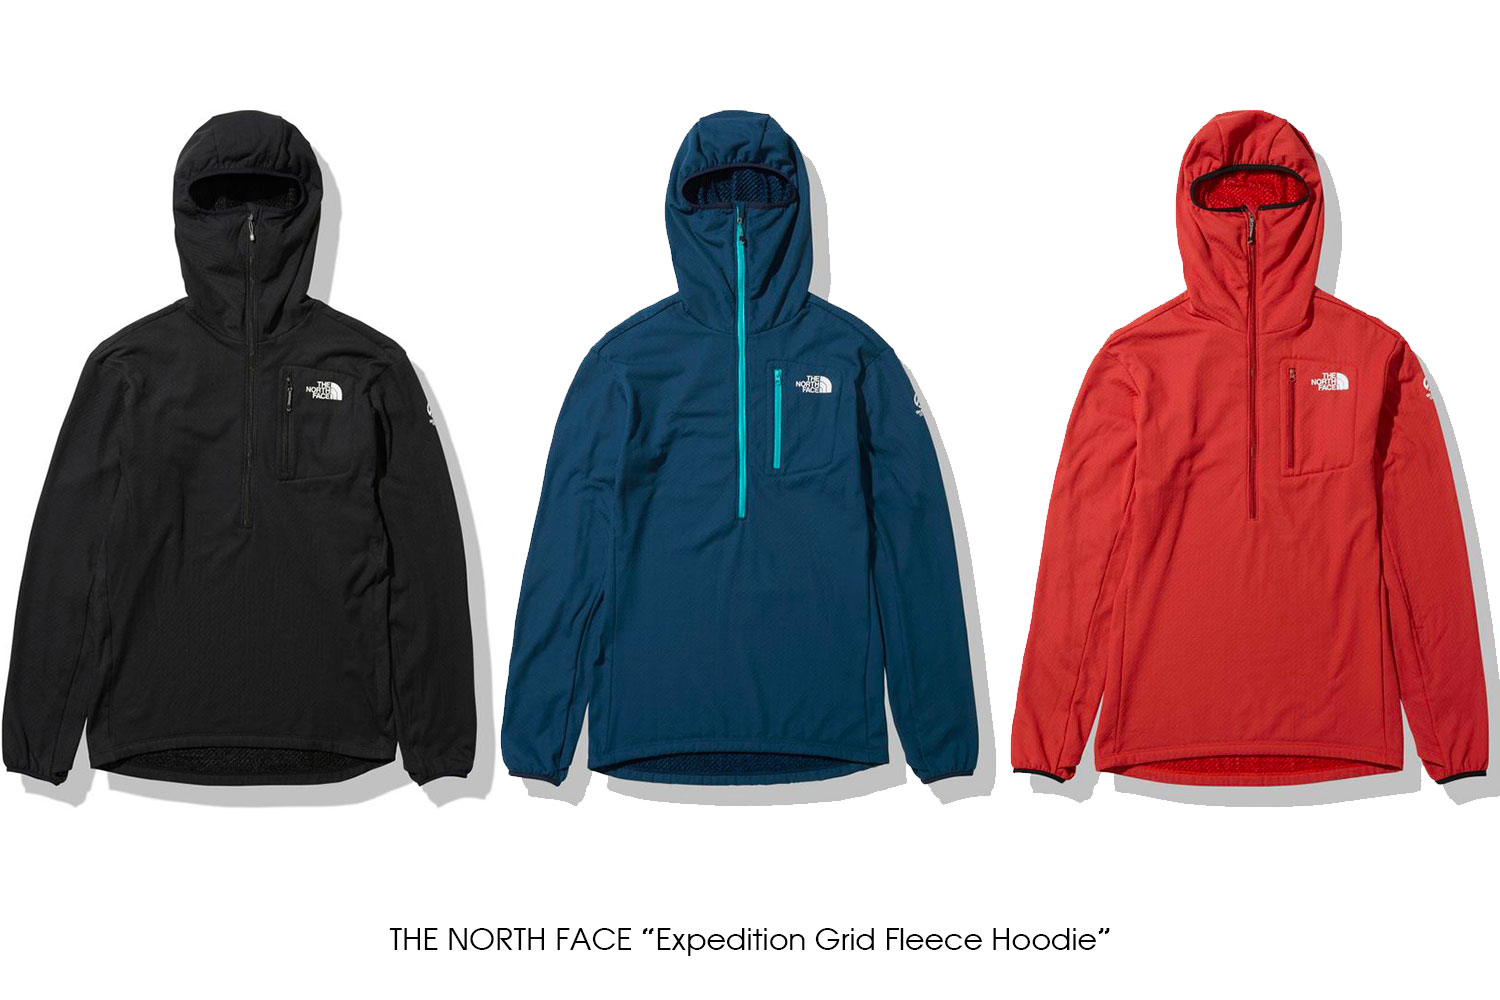 THE NORTH FACE "Expedition Grid Fleece Hoodie"